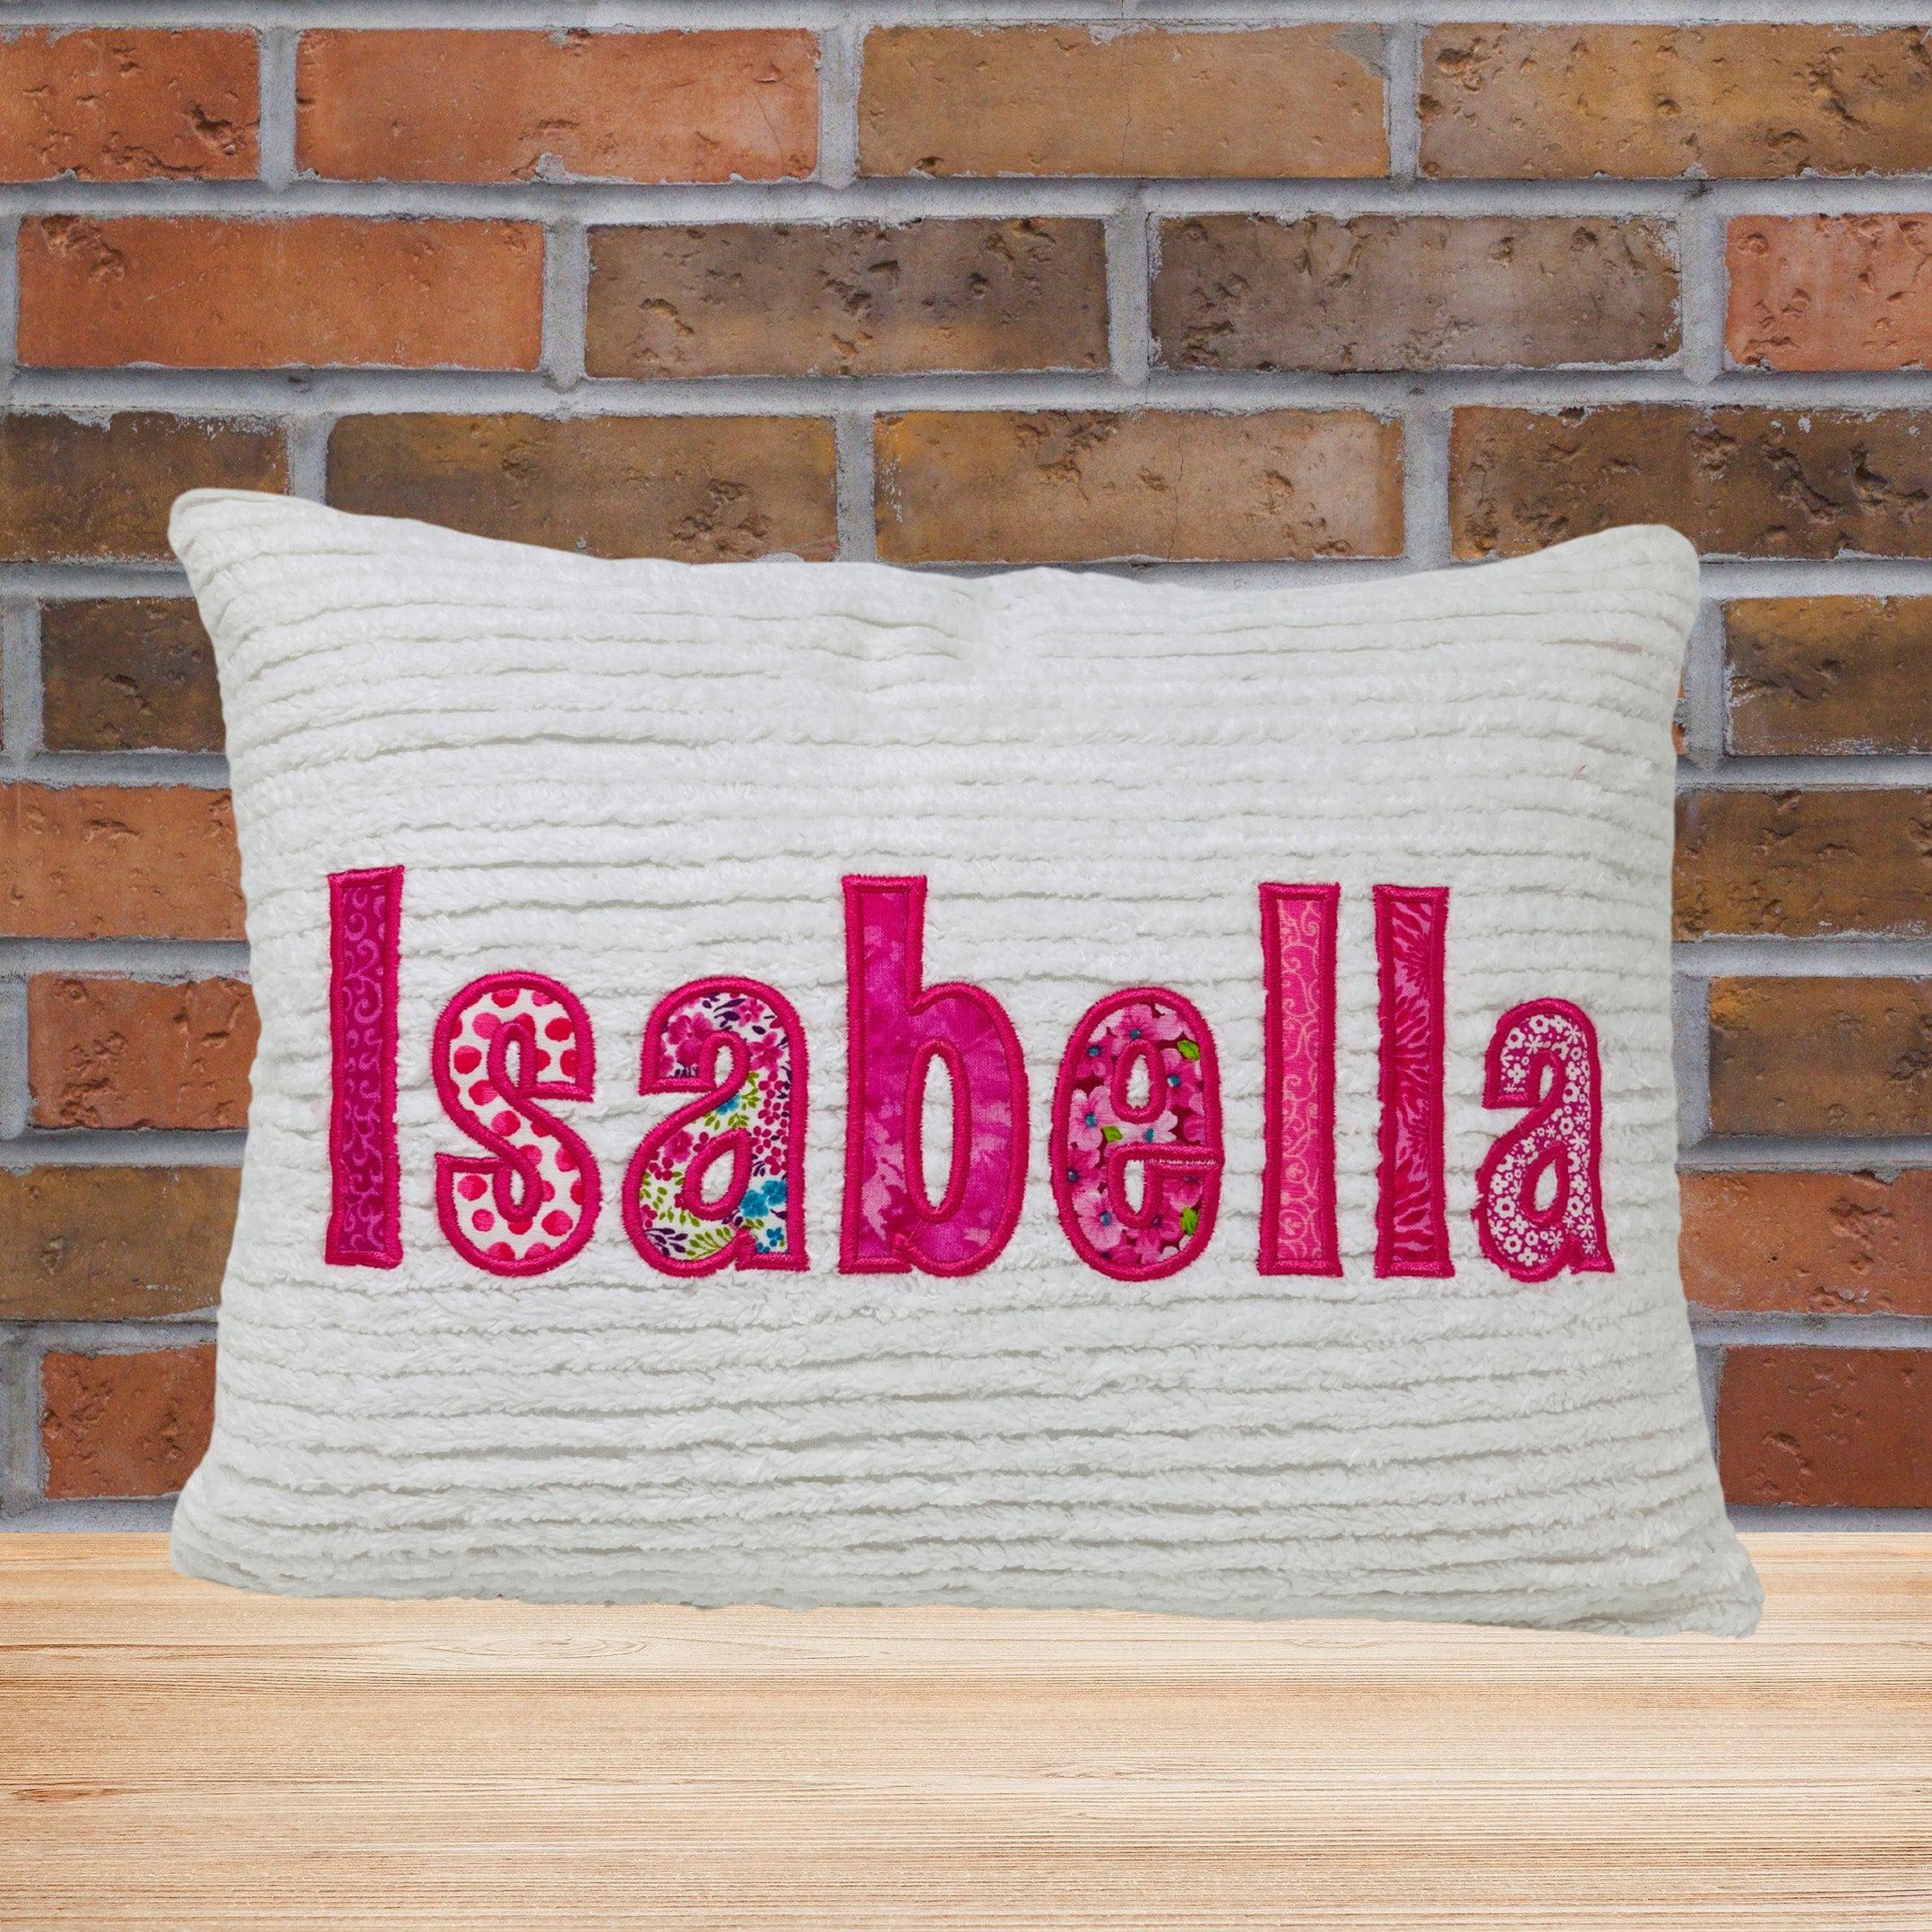 Personalized throw pillow for girls - white chenille fabric with bright pink applique name